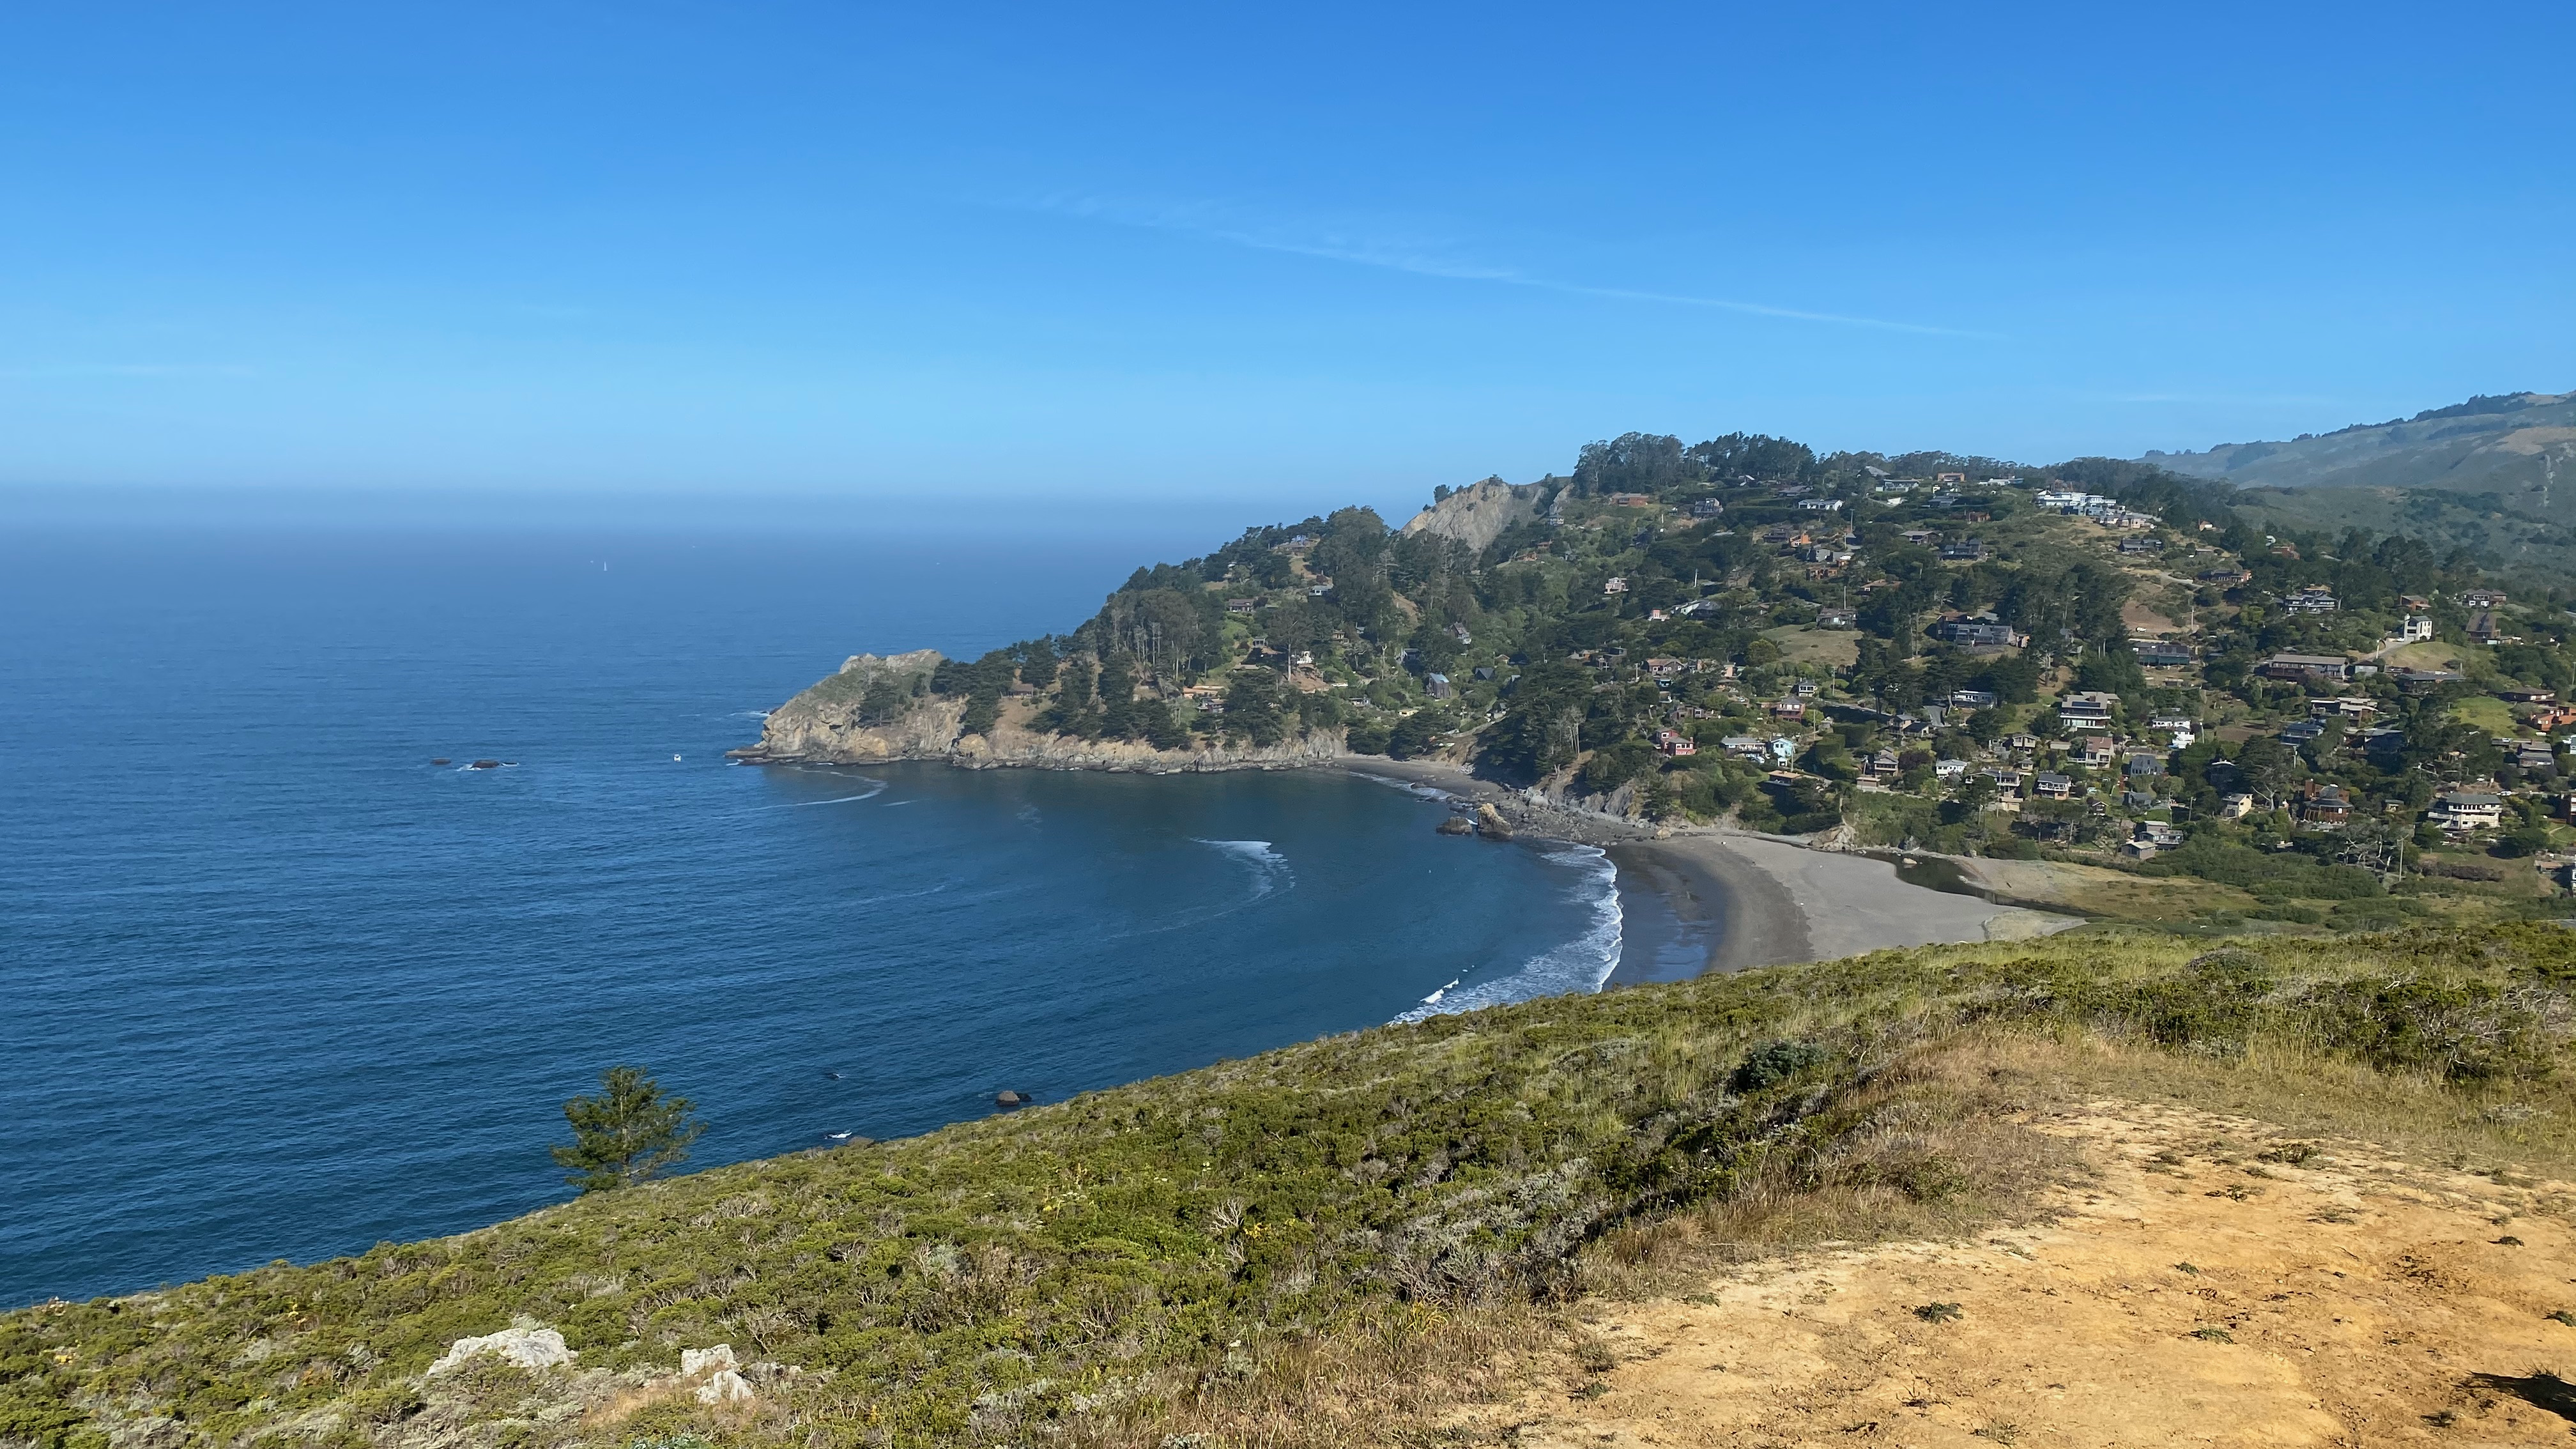 That climb up the Coastal Fire Road from Muir Beach is a DOOZY